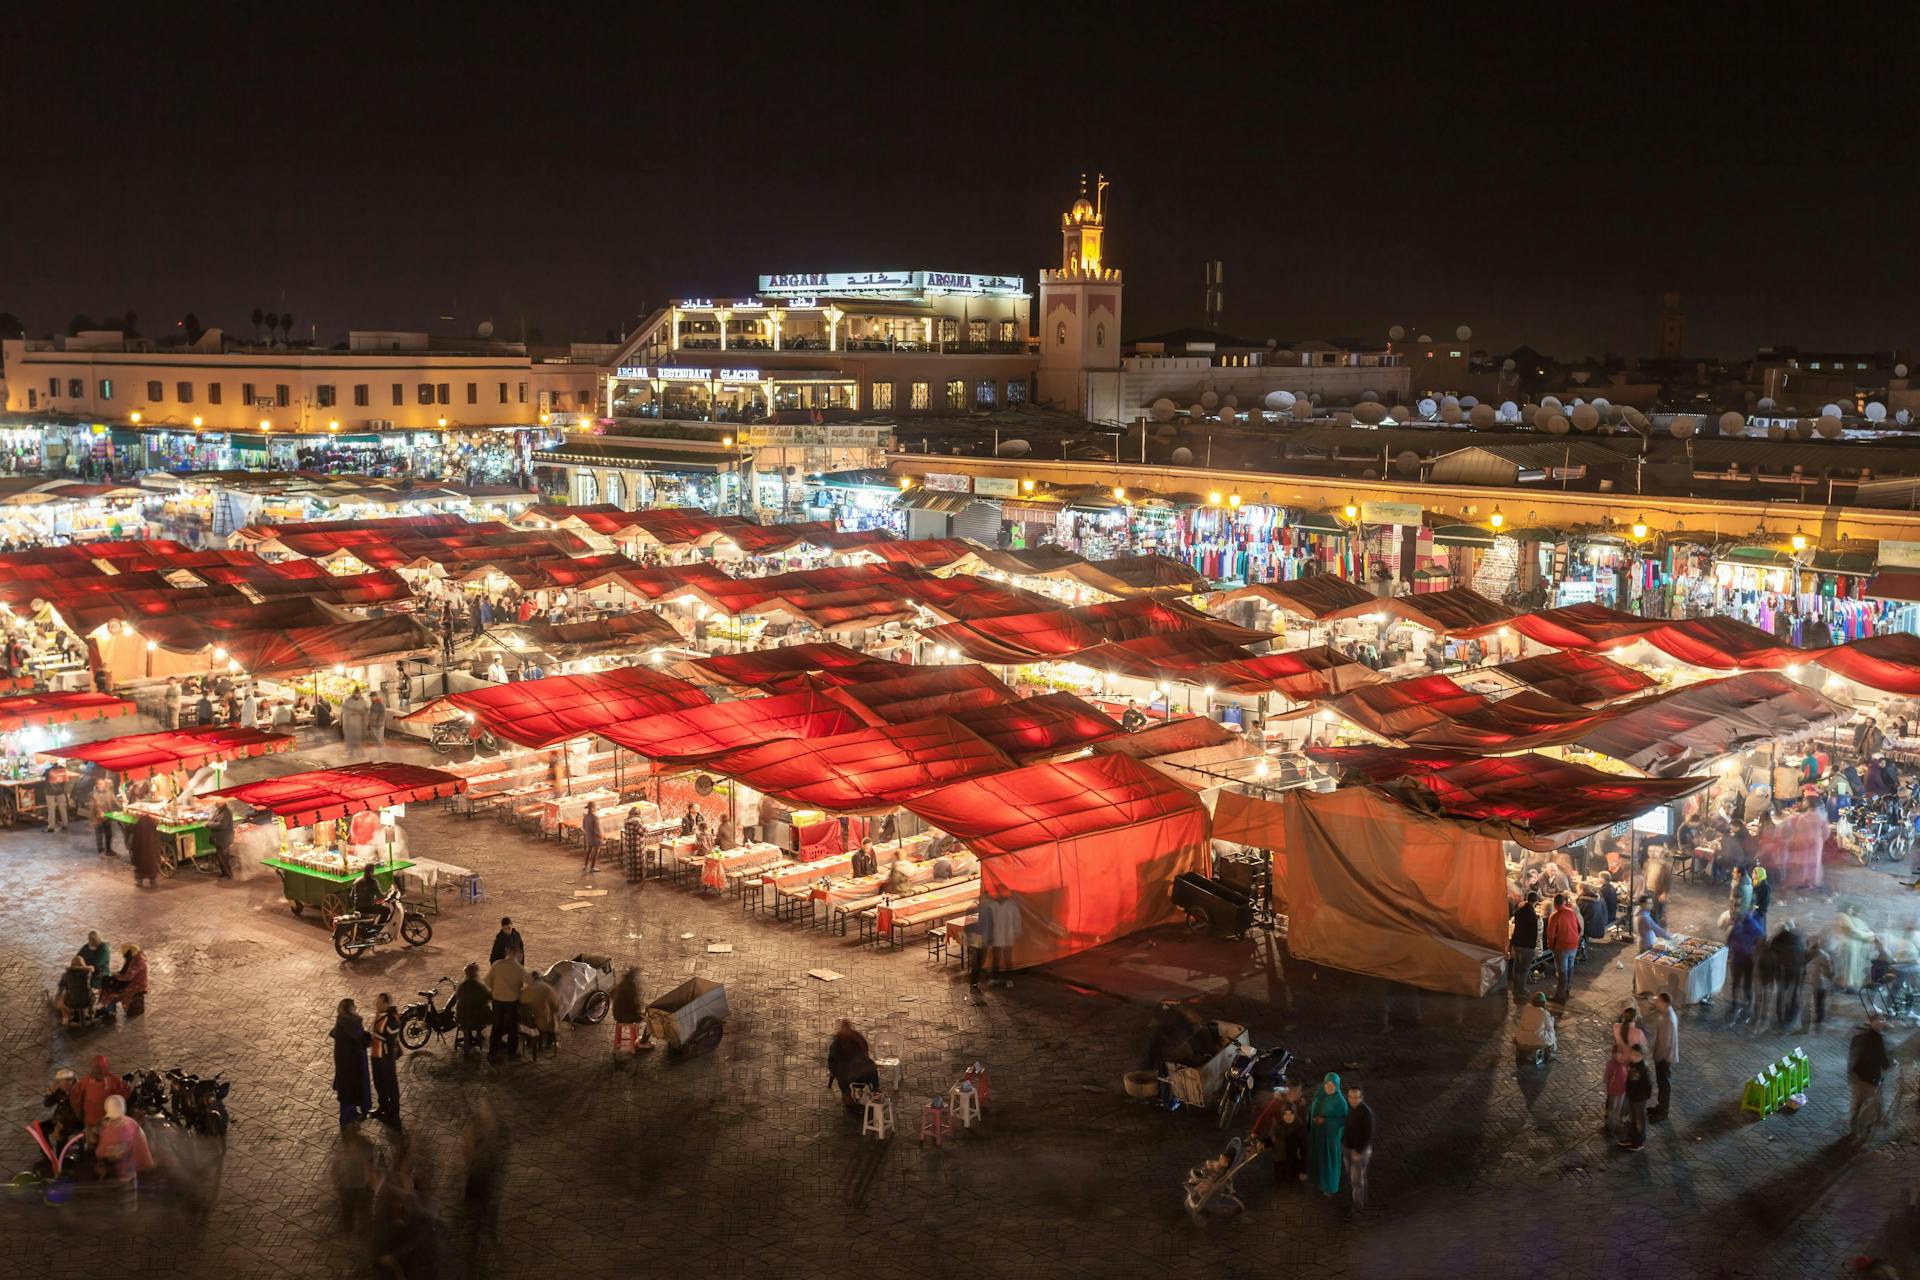 A view of lit up Djemaa El Fna during night time. 